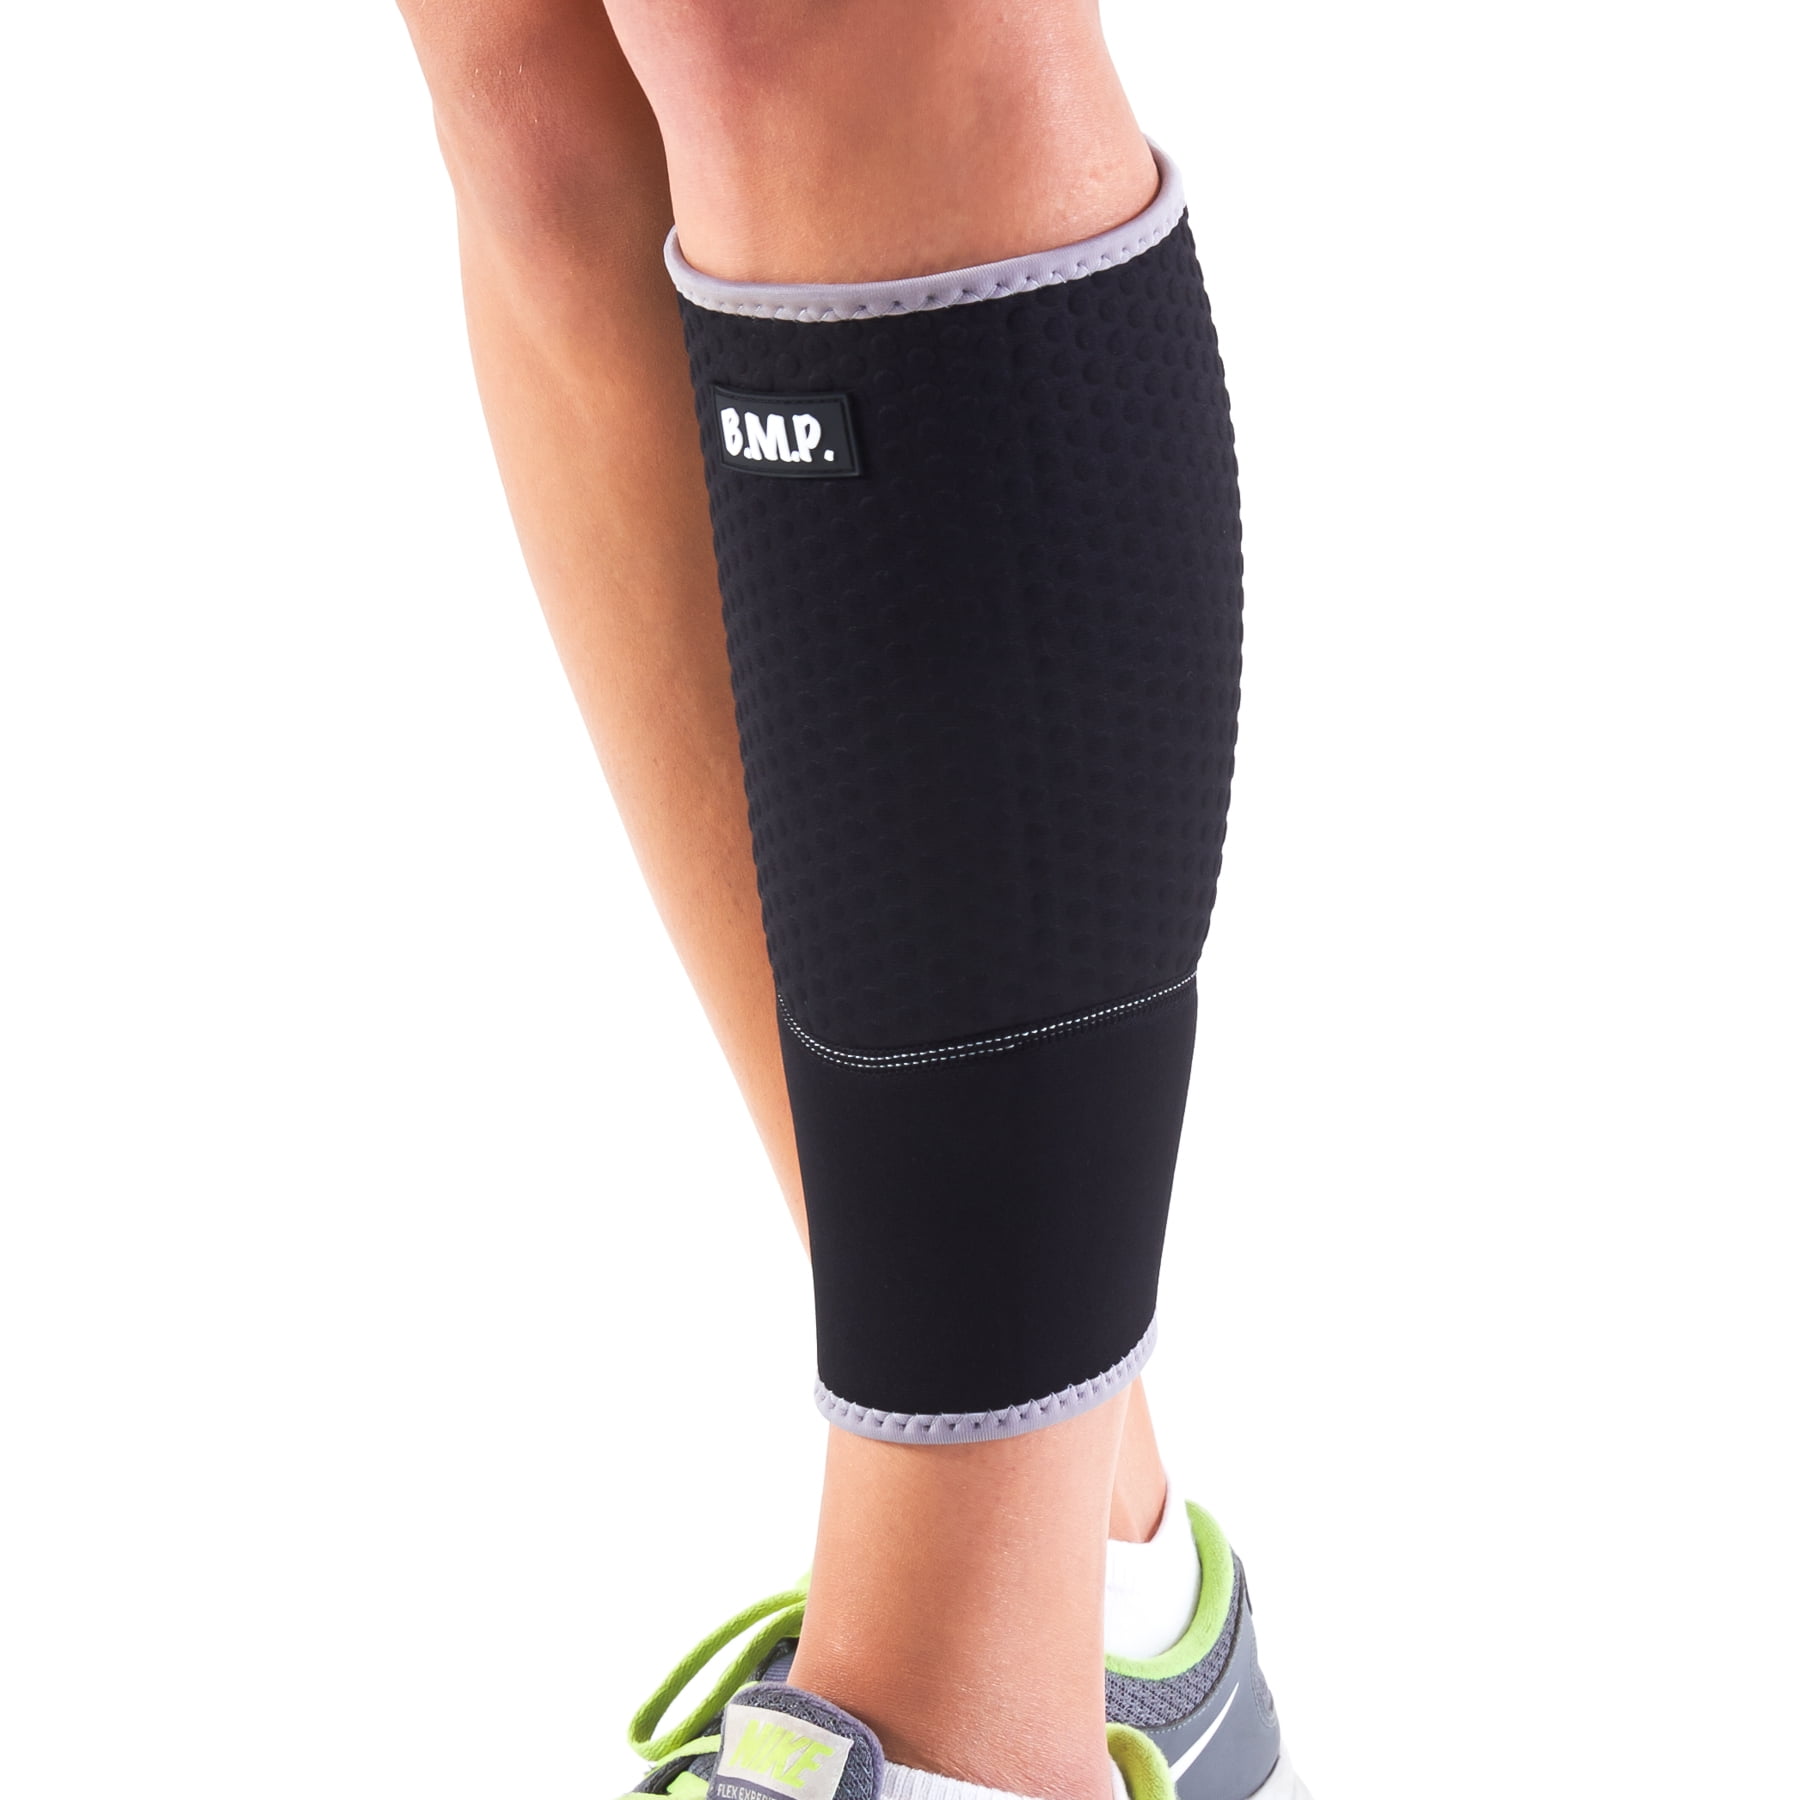  Wide Calf Compression Sleeves Women & Men, Plus Size Calf Leg Compression  Sleeve 6XL for Shin Splints Leg Pain Relief Support, Varicose Vein,  Swelling, Edema, Travel, XXXXXX-Large Wide Ankle Size 